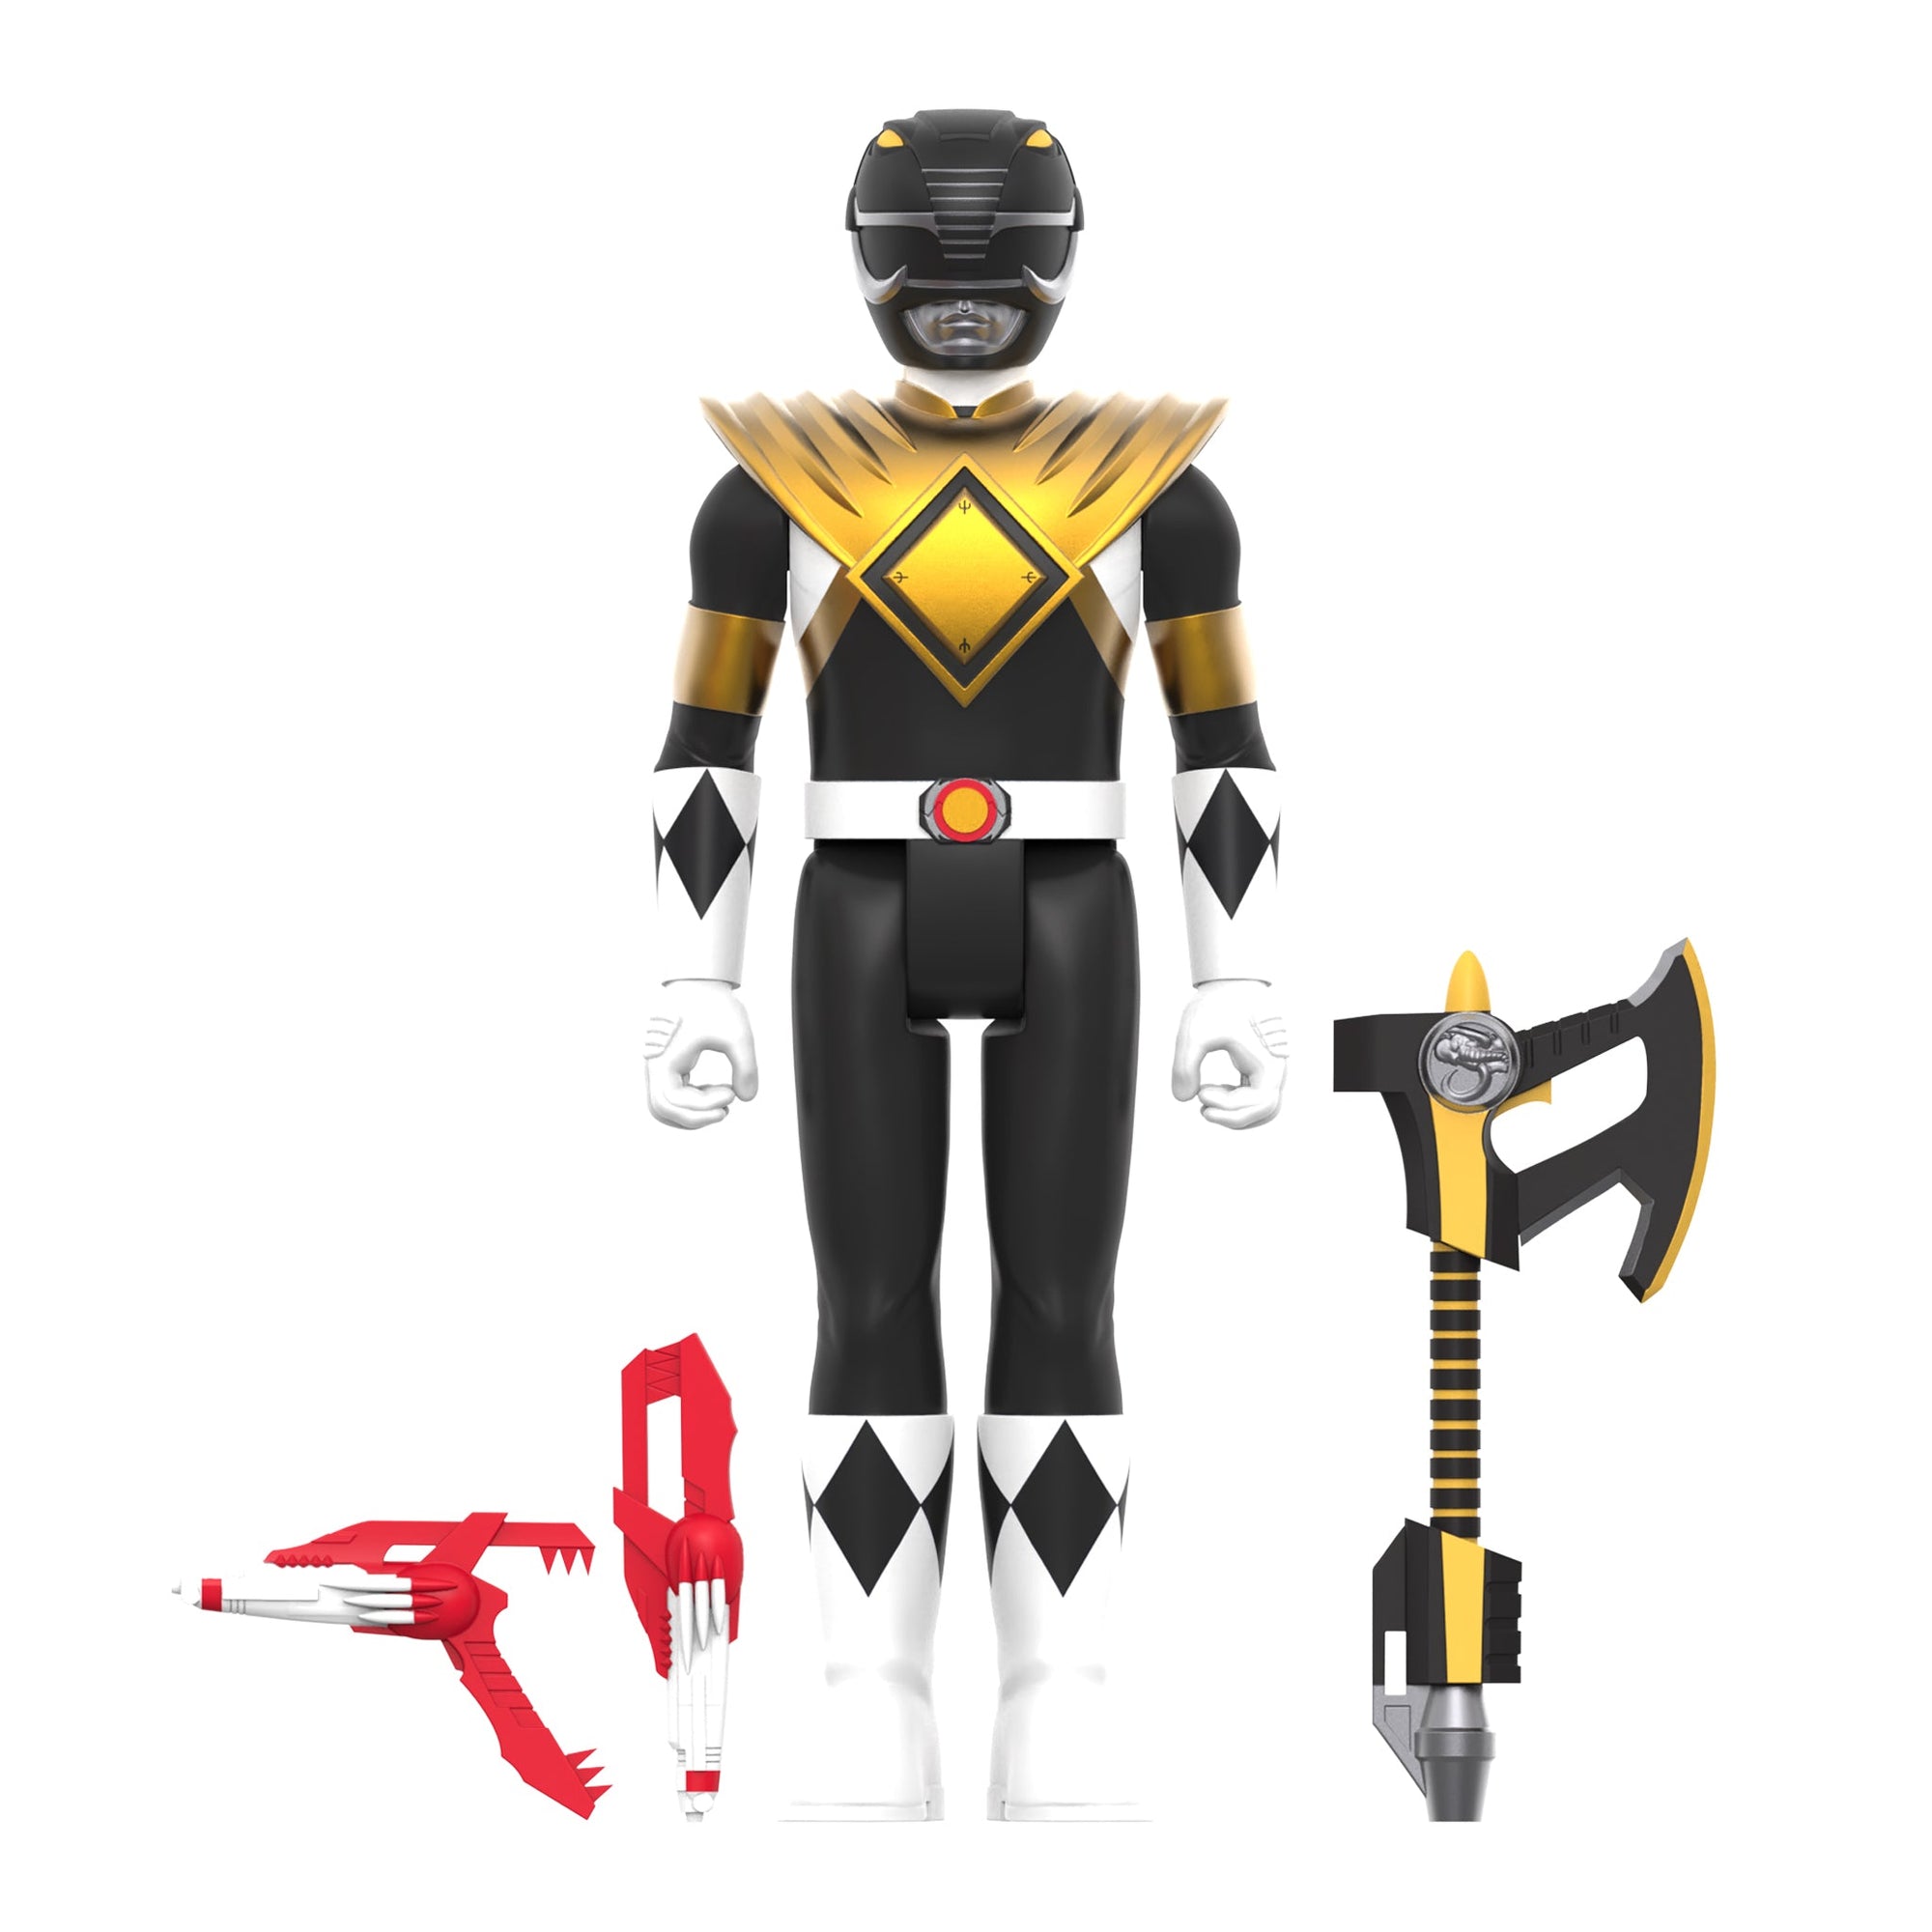 Black Ranger (Dragon Shield) - Mighty Morphin Power Rangers Reaction Figure Wave 4 by Super7